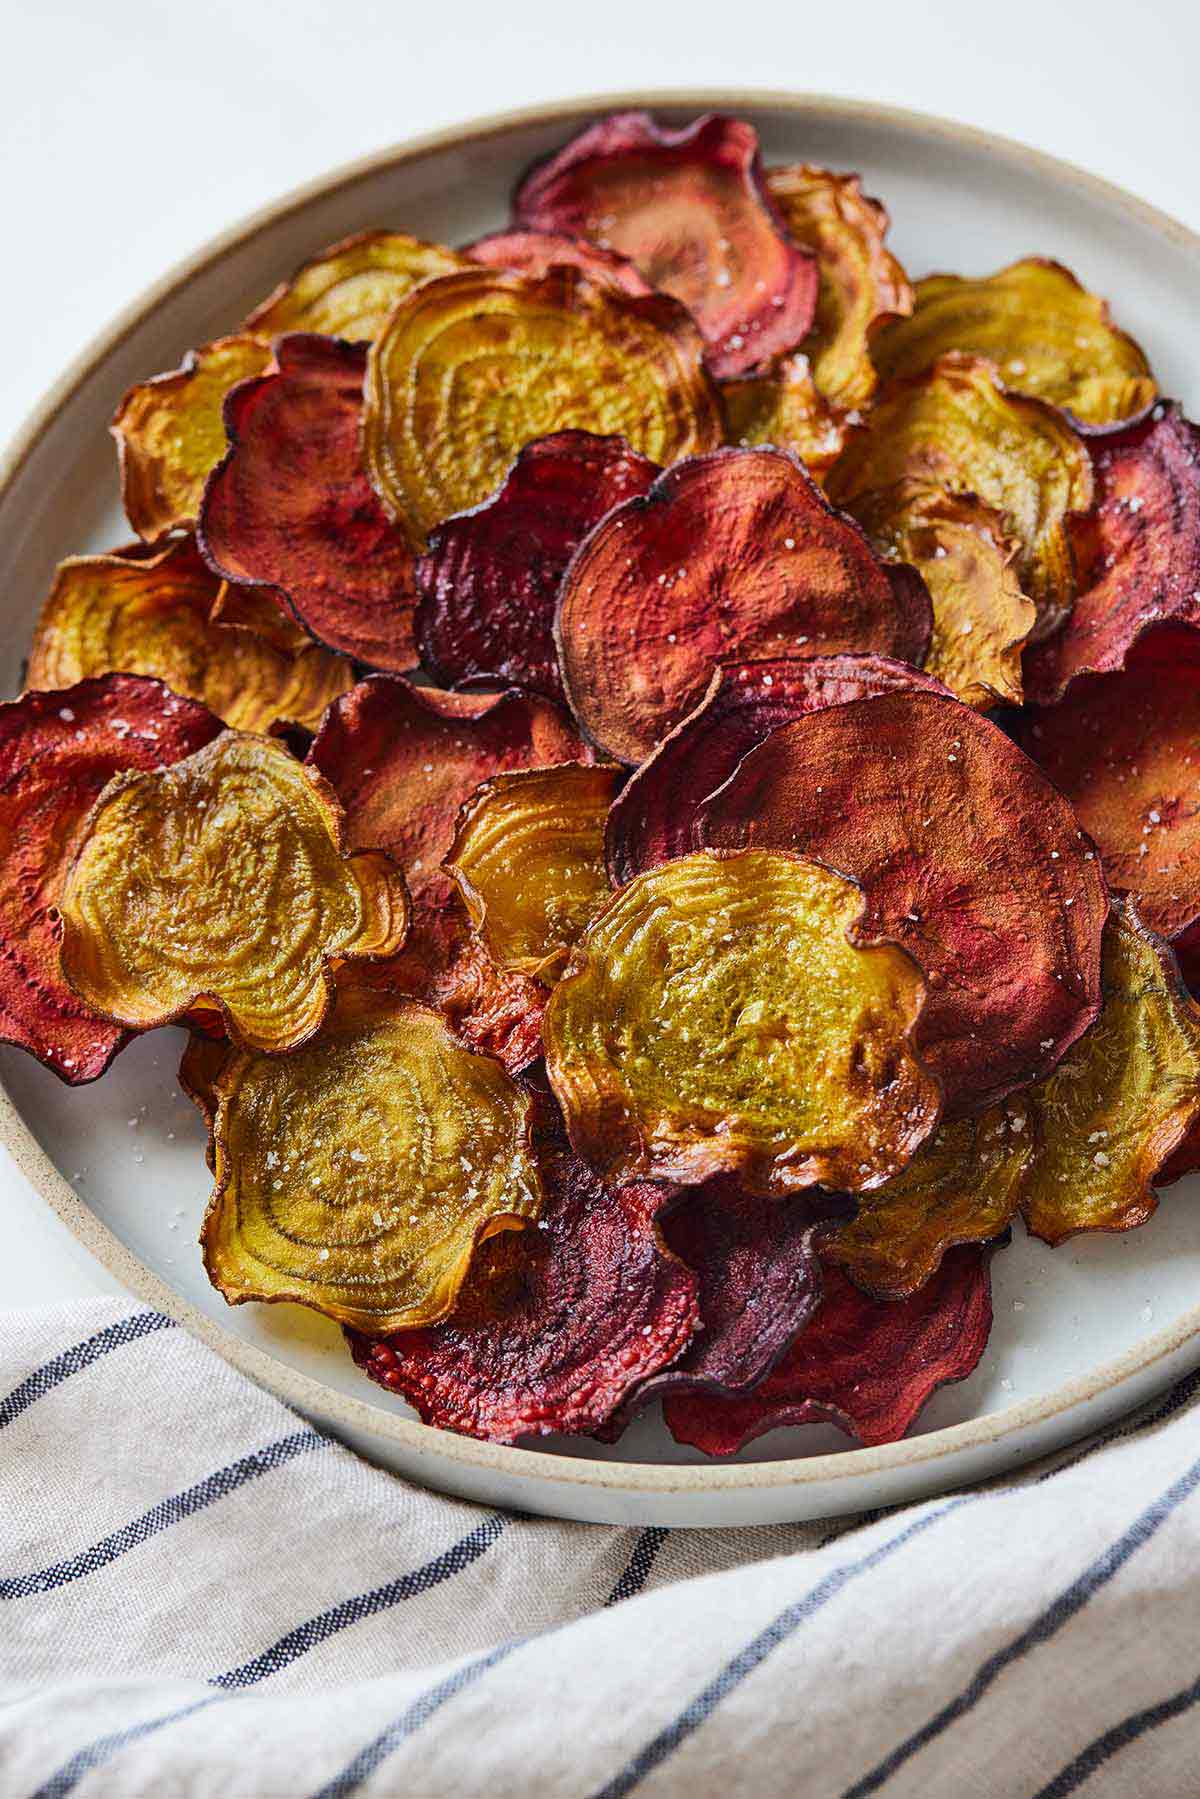 Overhead view of a plate of multi-colored beet chips.